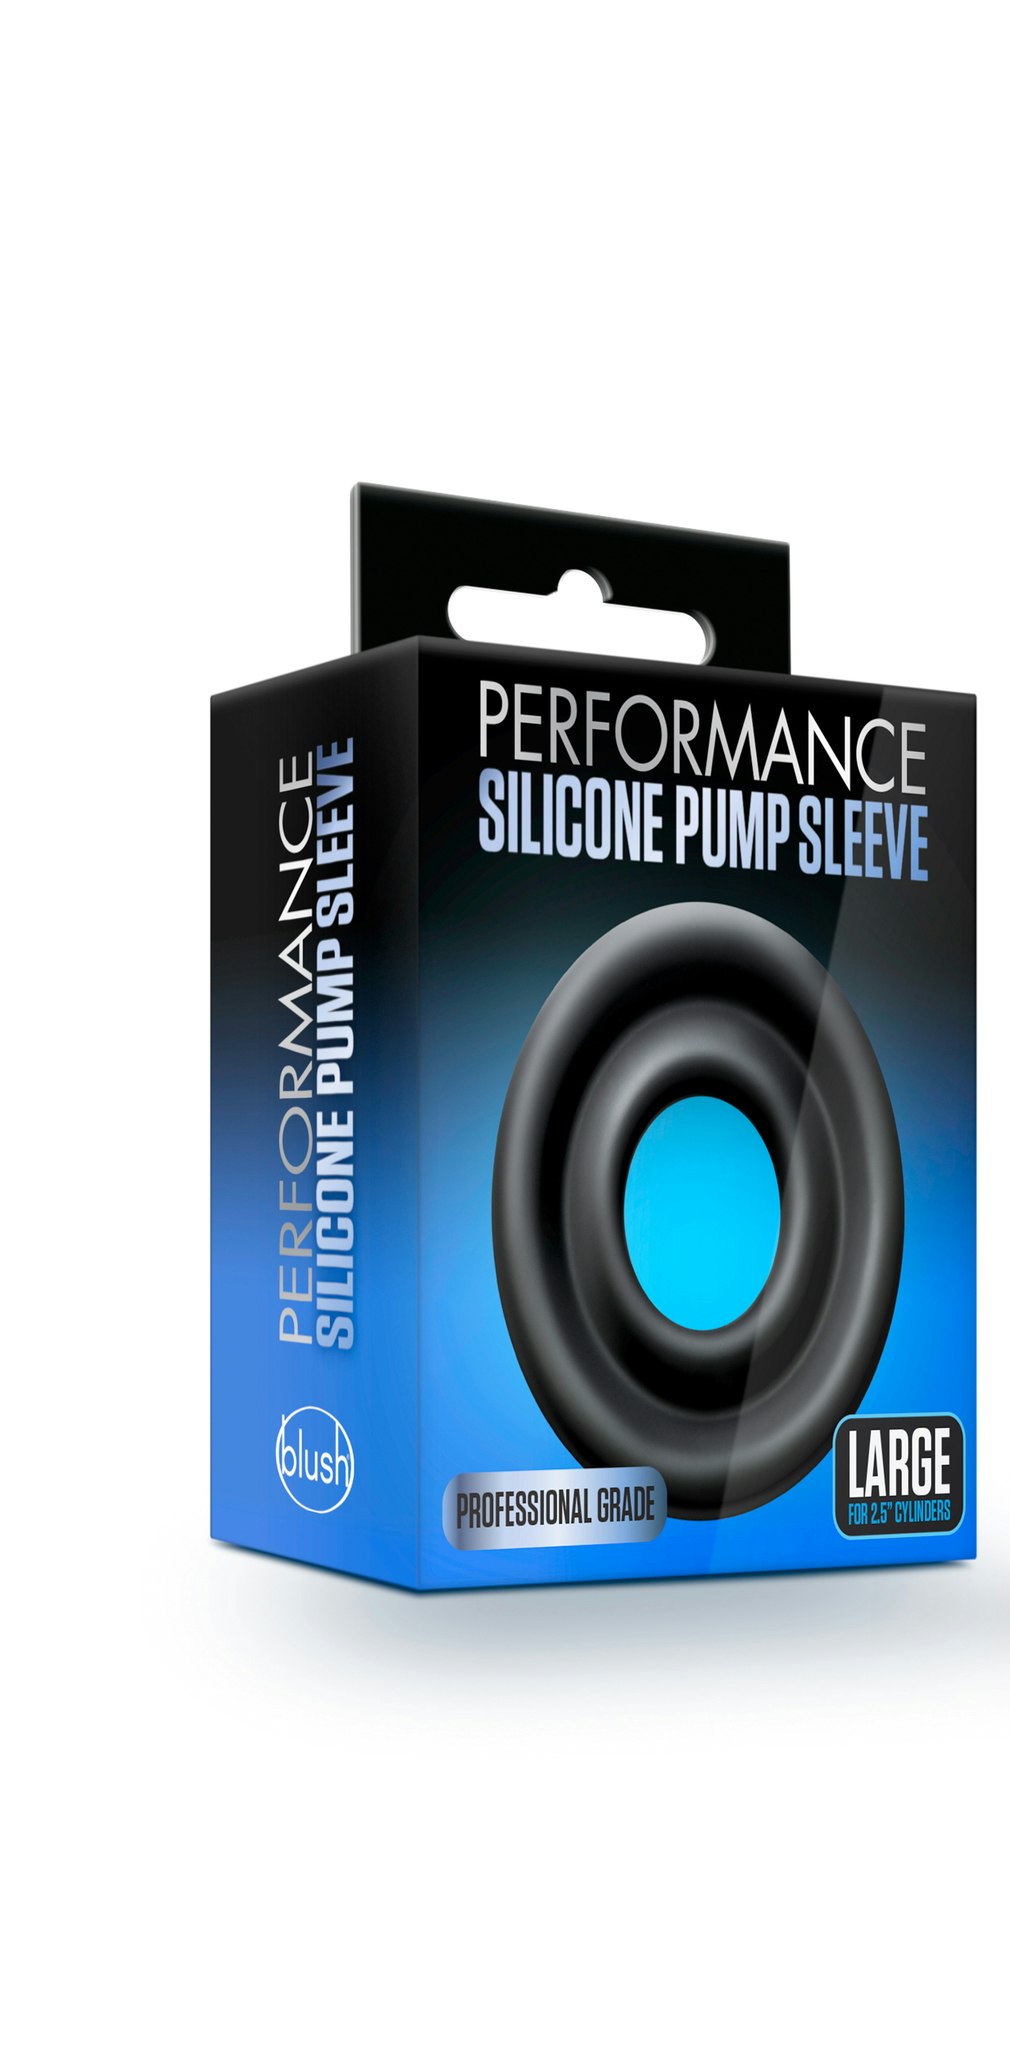 Performance Silicone Pump Sleeve, Large